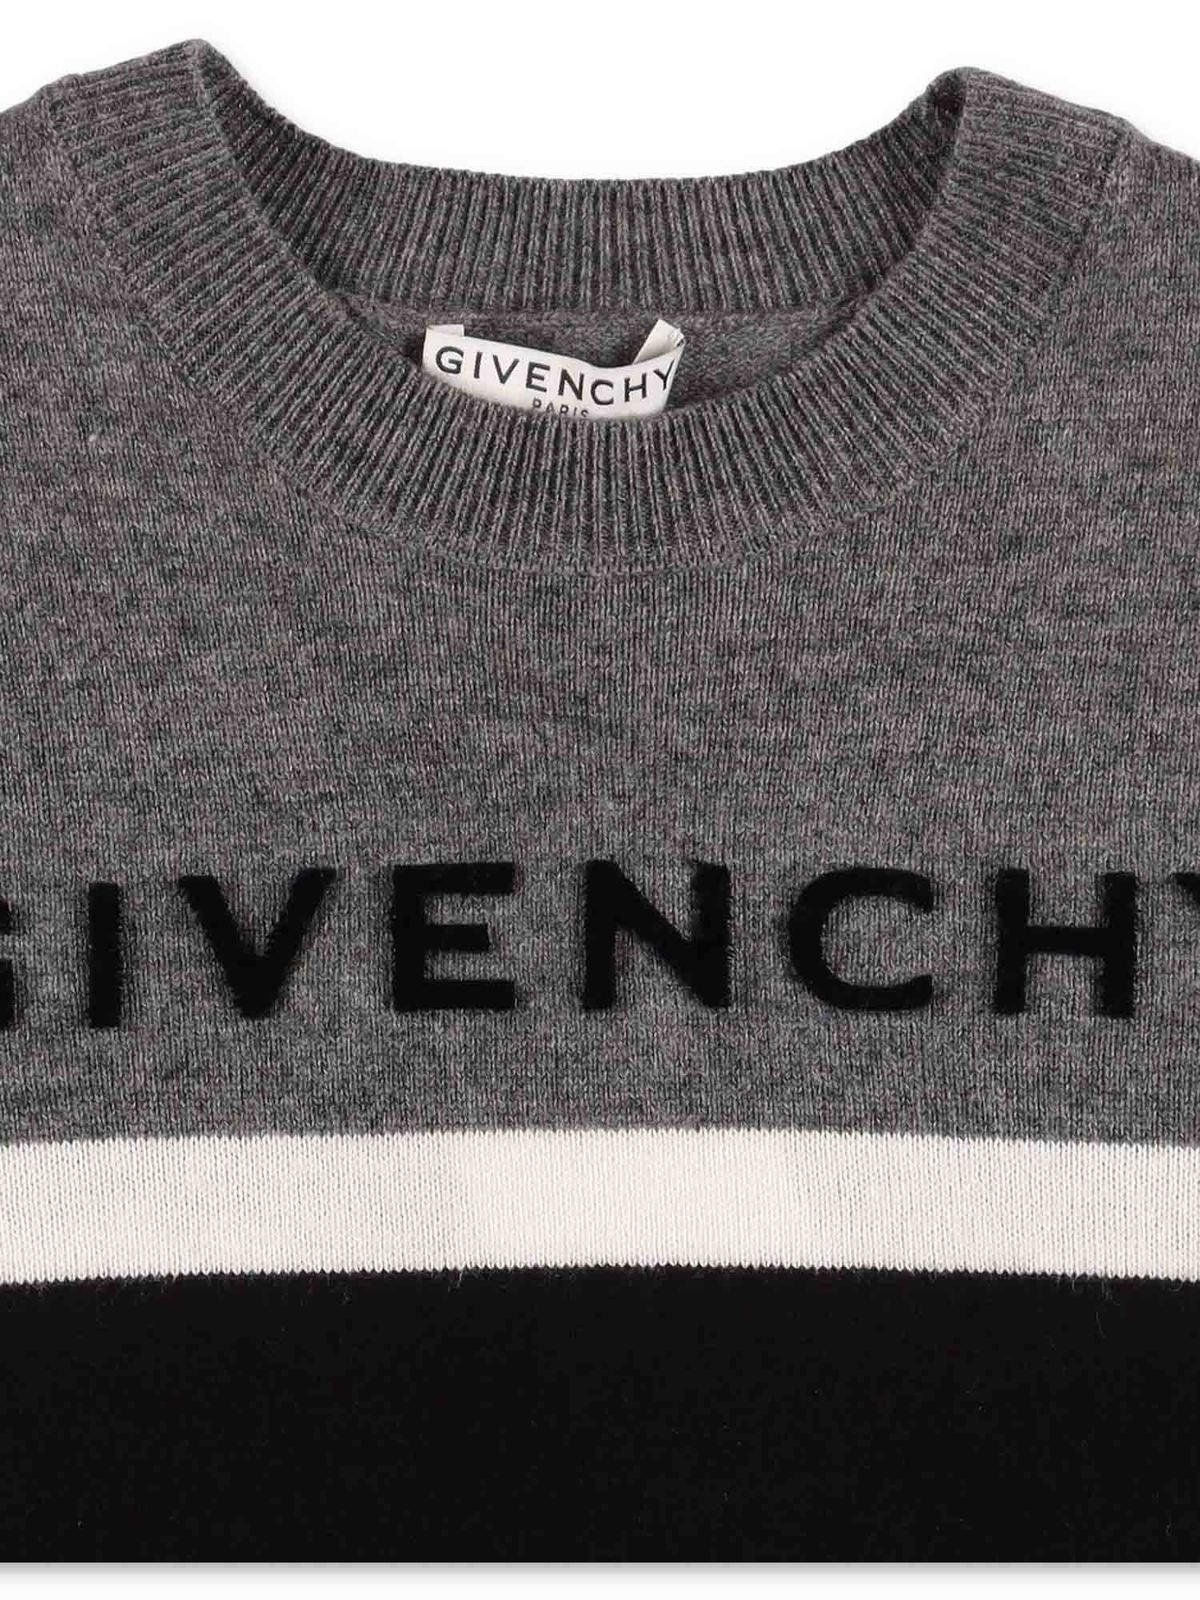 Black and gray sweater with logo